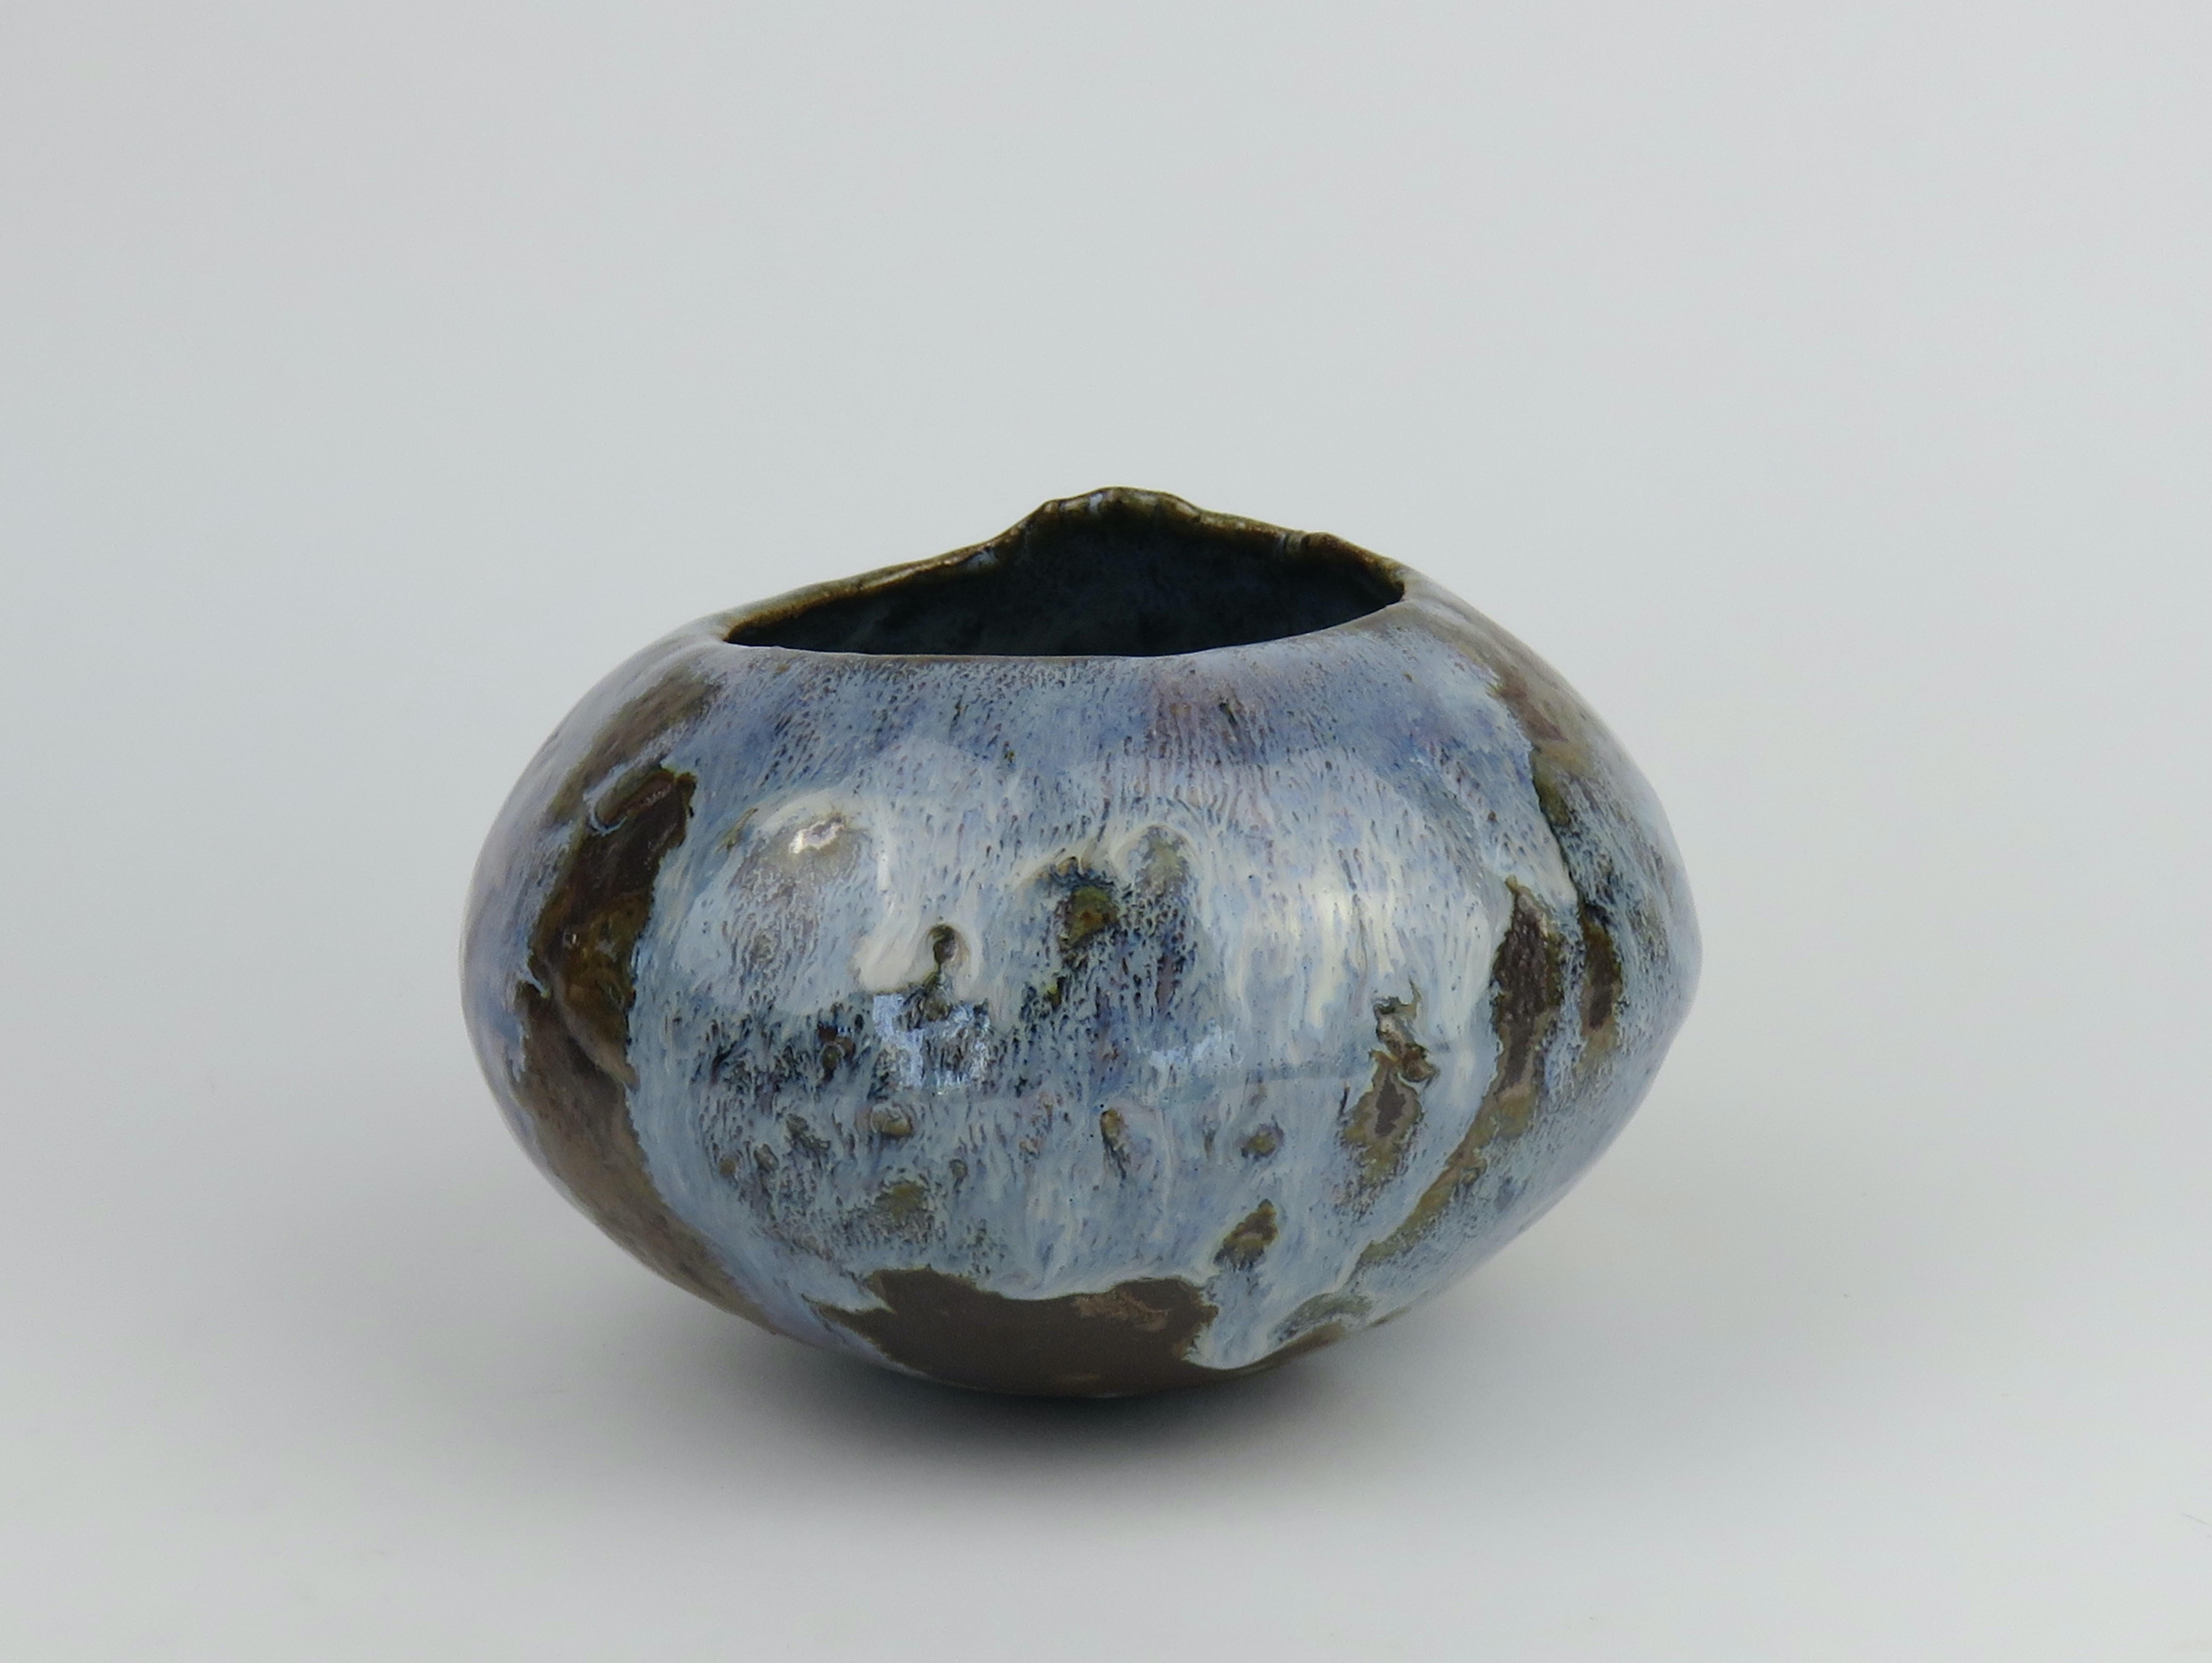 Wood-fired, hand-coiled ceramic bowl with blue glaze.
When a handmade clay pot is fired in a wood-fired kiln, the results are always an unpredictable surprise. This one surpasses all expectation. While the blue glaze melted and dripped 'just so',